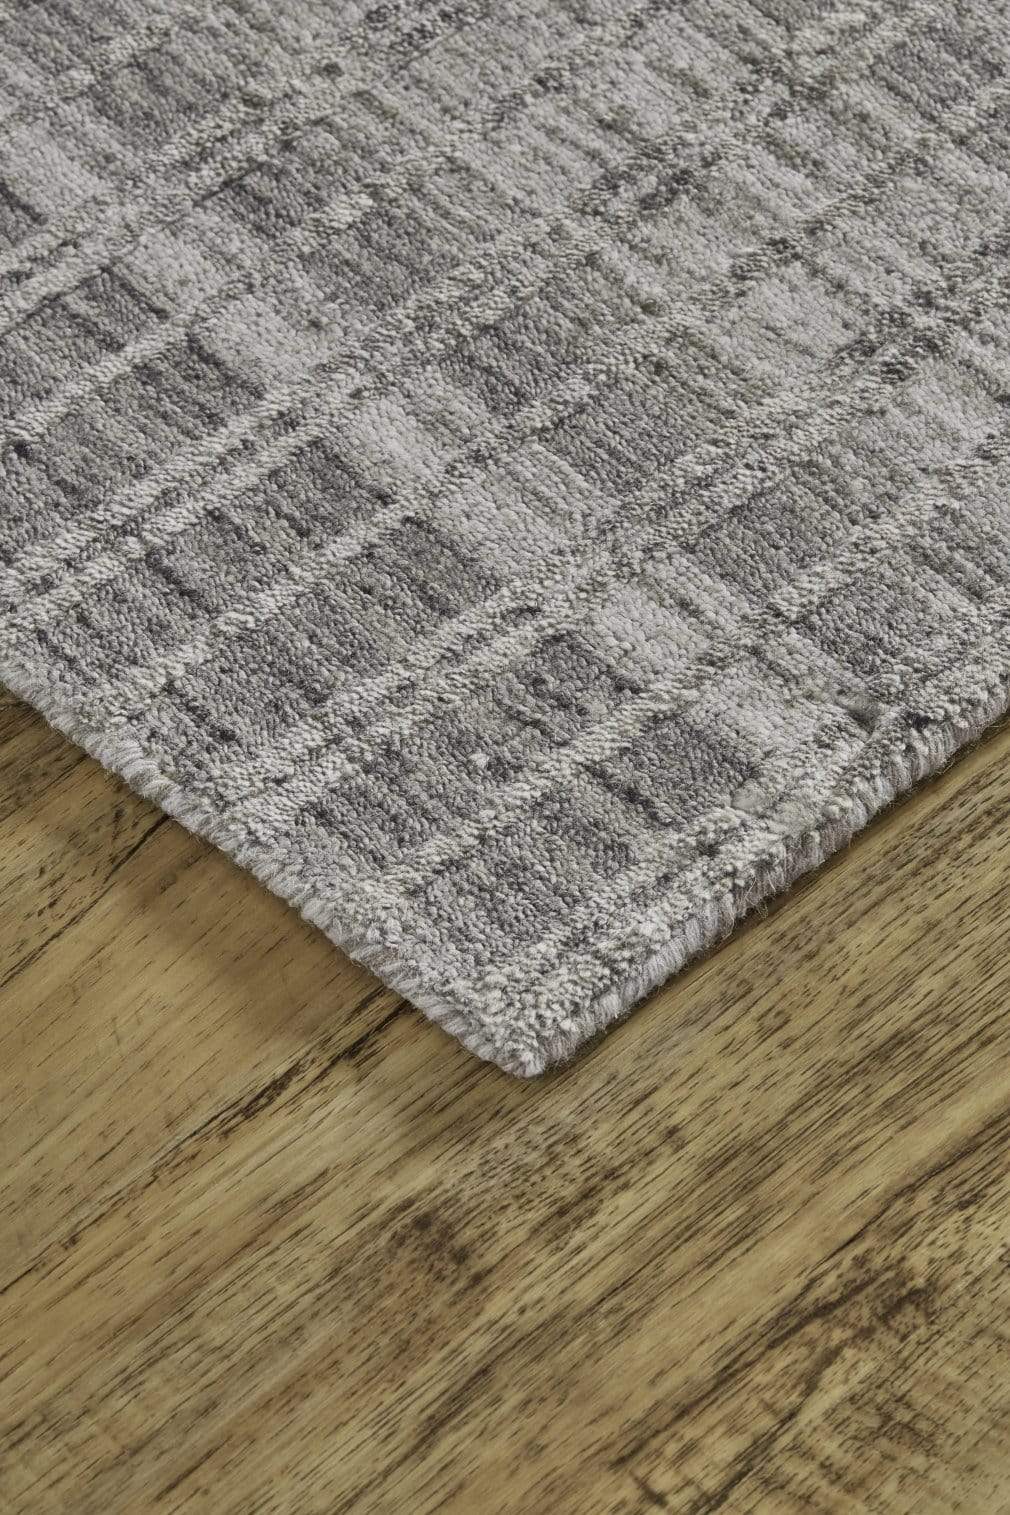 Feizy Feizy Odell Classic Handmade Rug - Available in 5 Sizes - Light Gray & Warm Gray